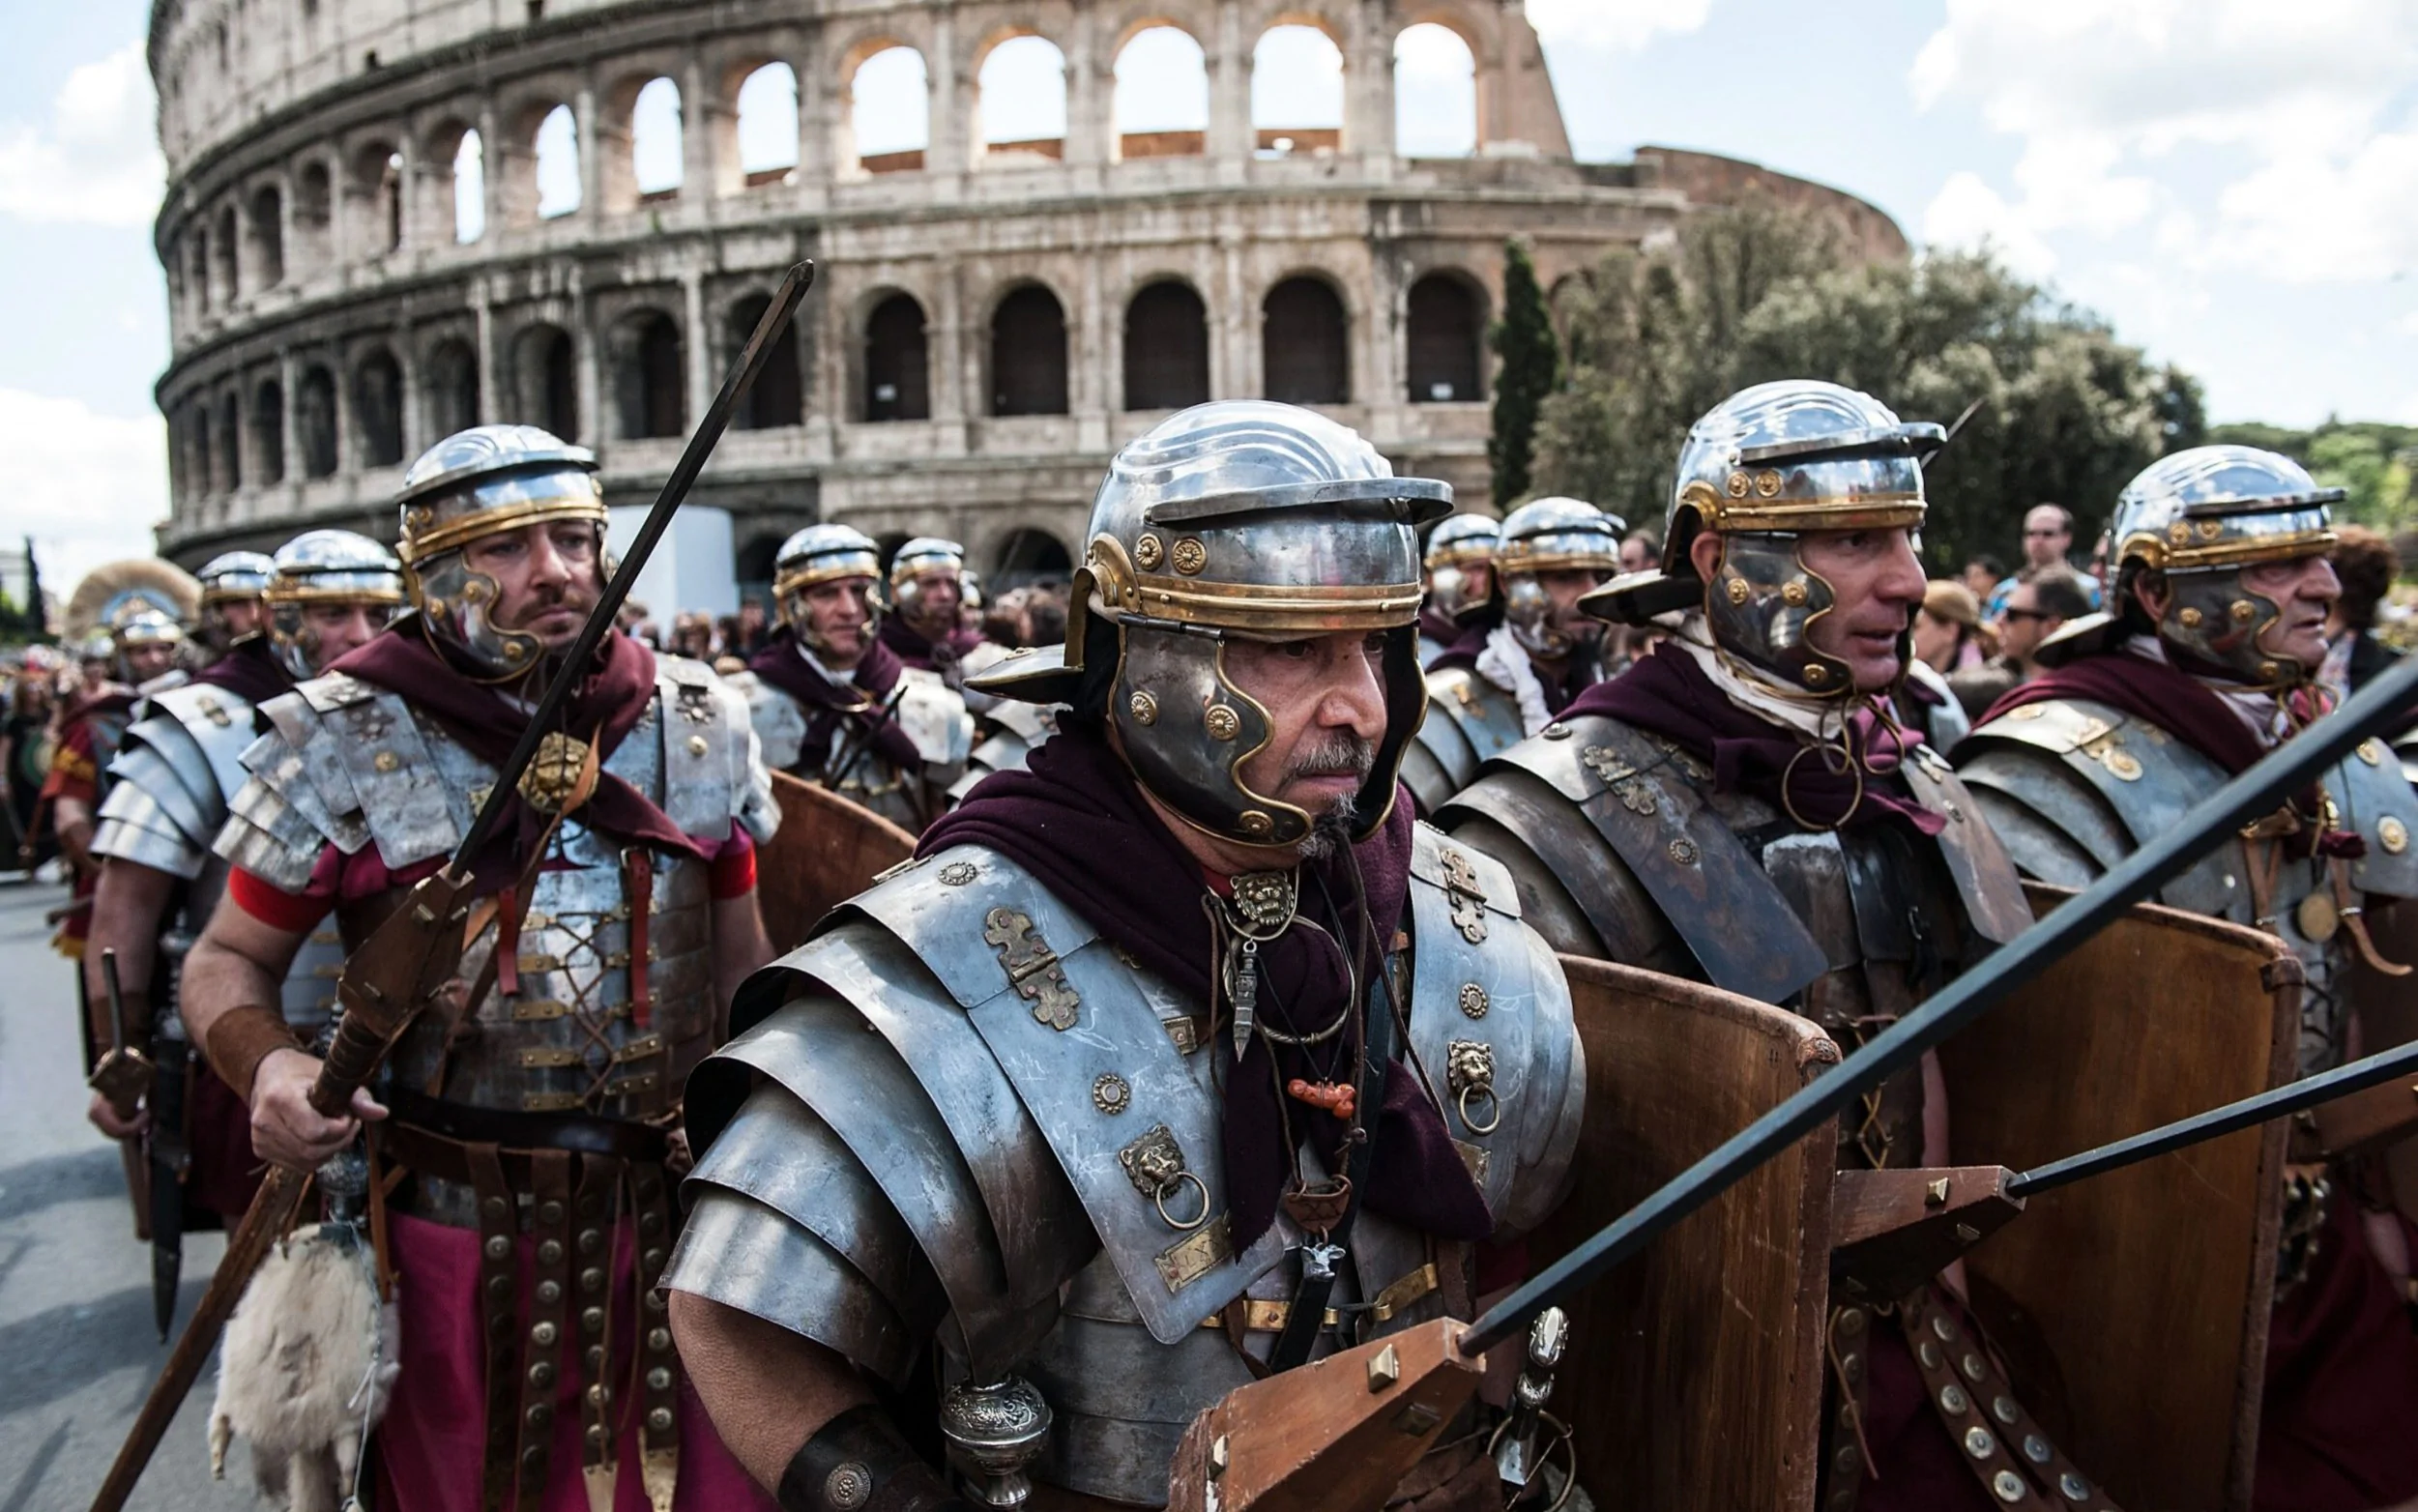 Roman soldiers had shields and armor laced with diamonds